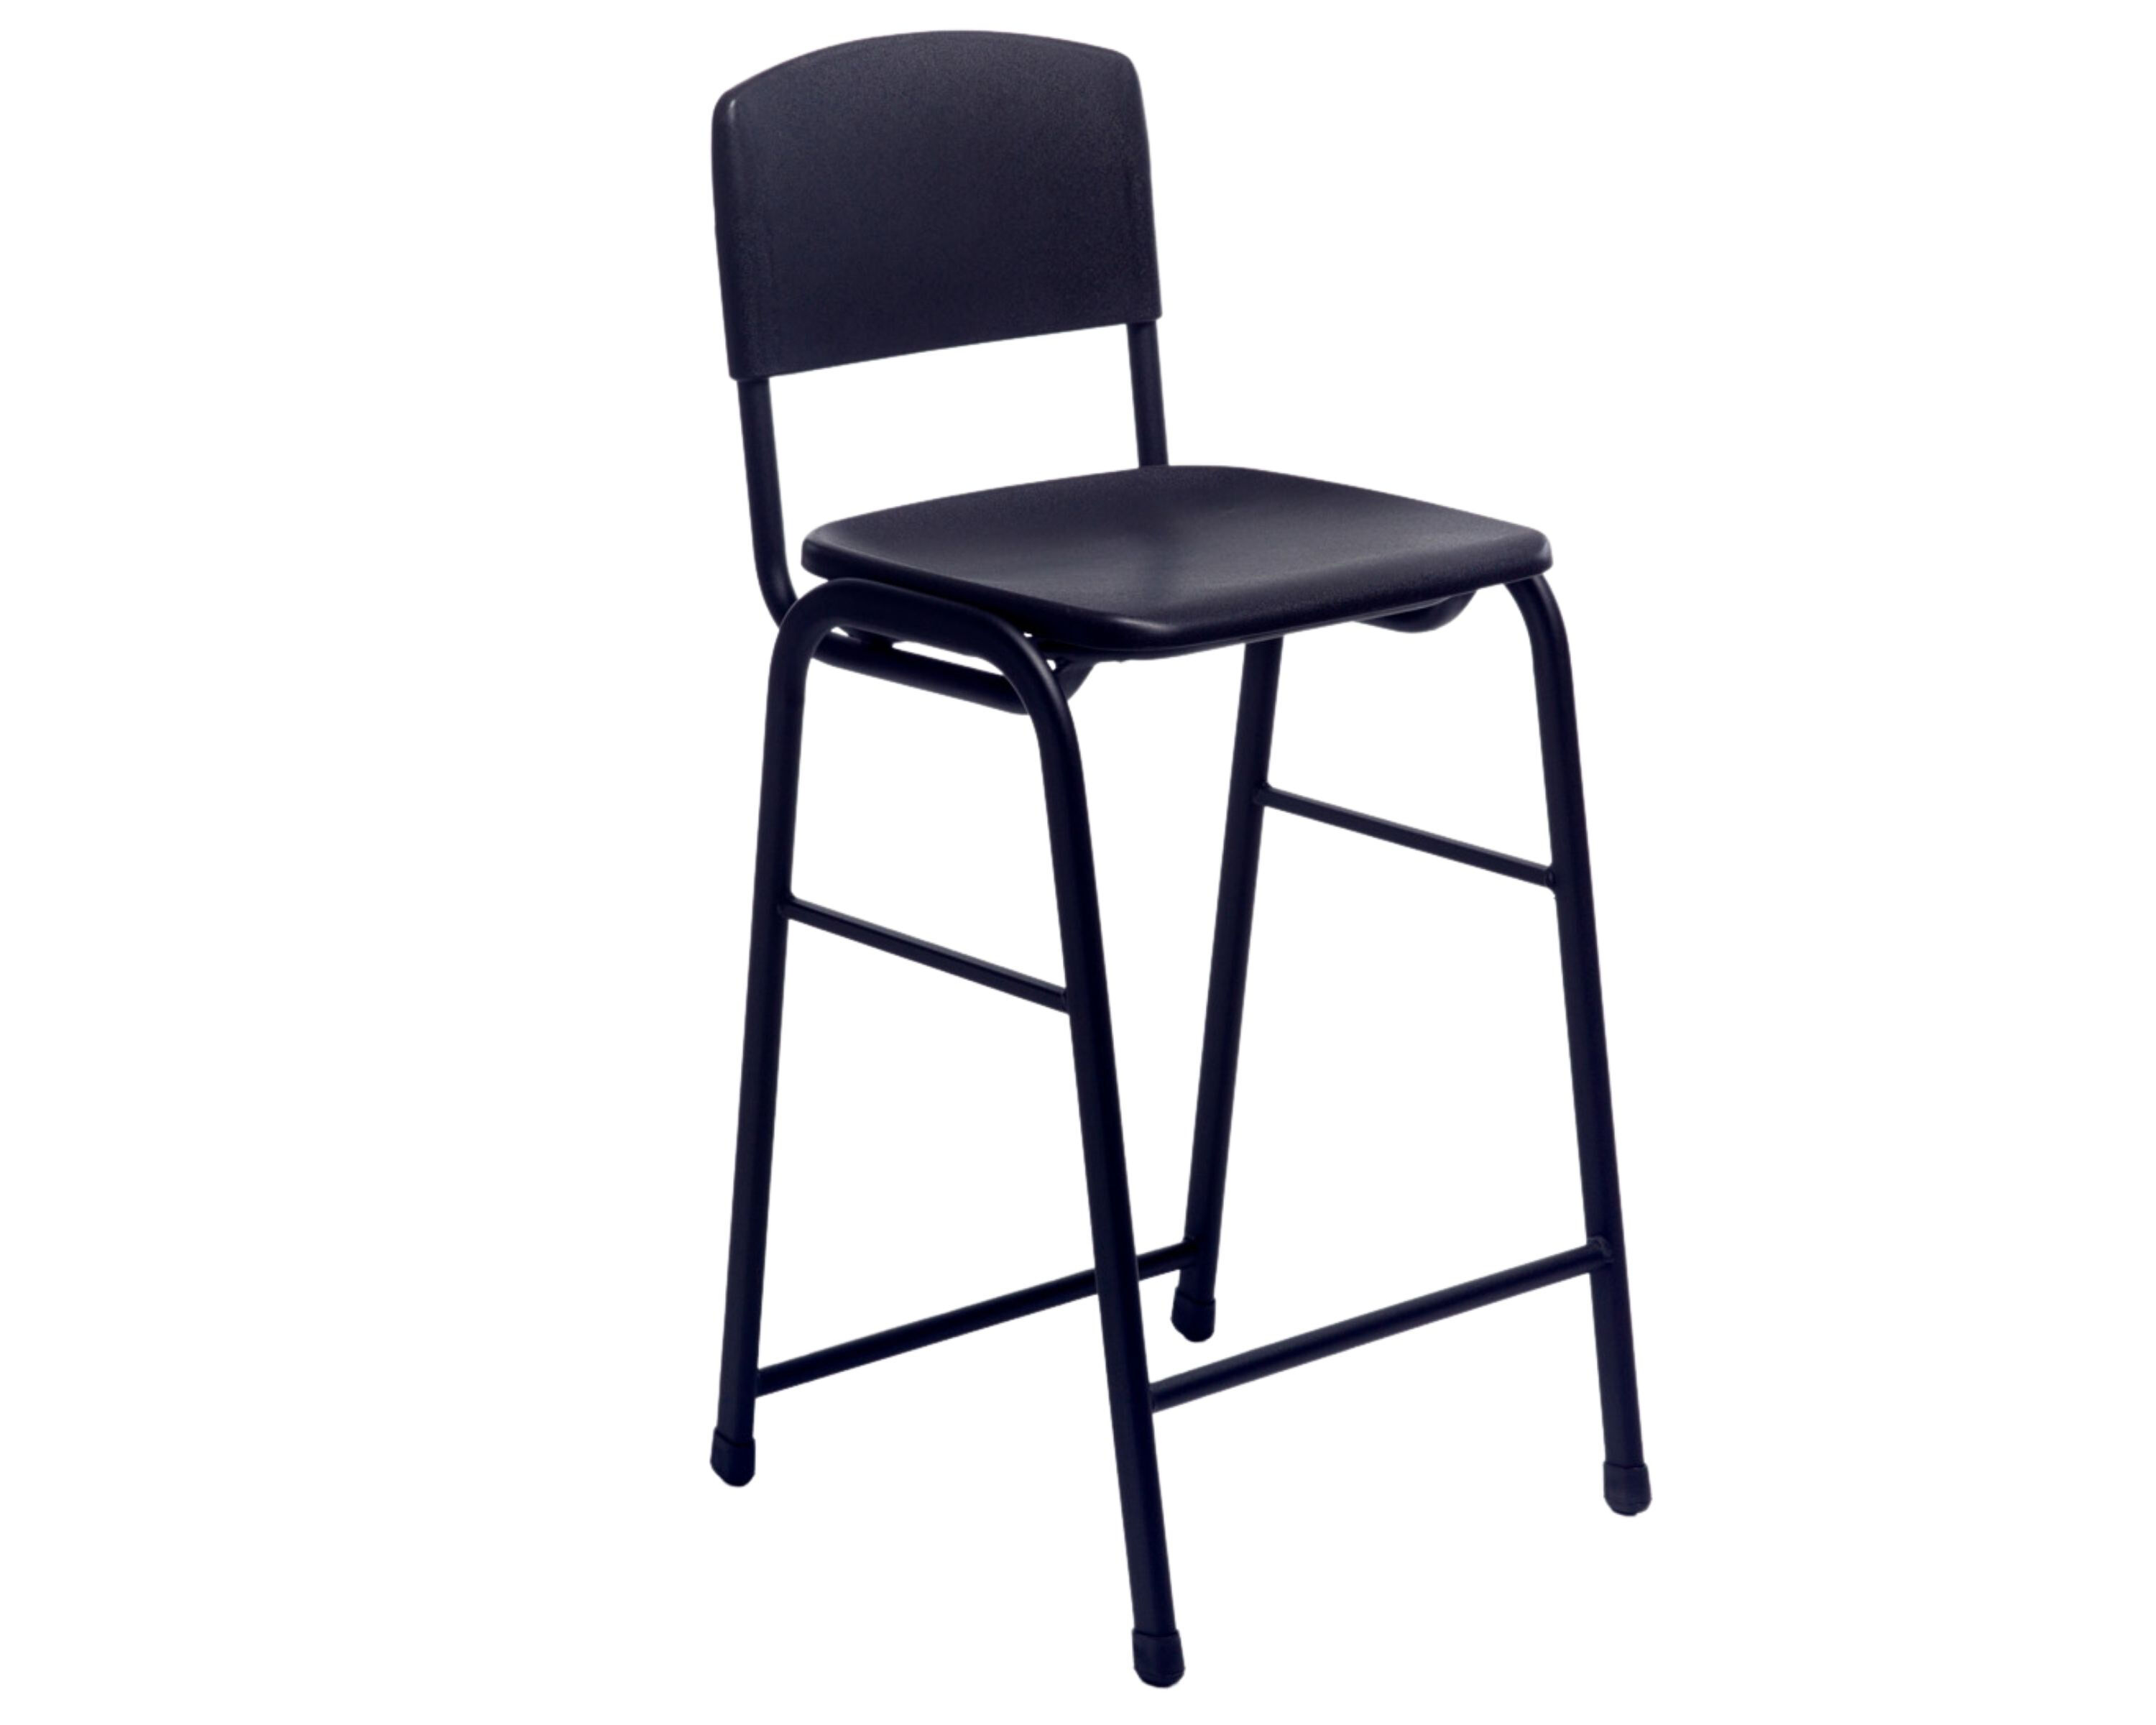 Research stool with back rest